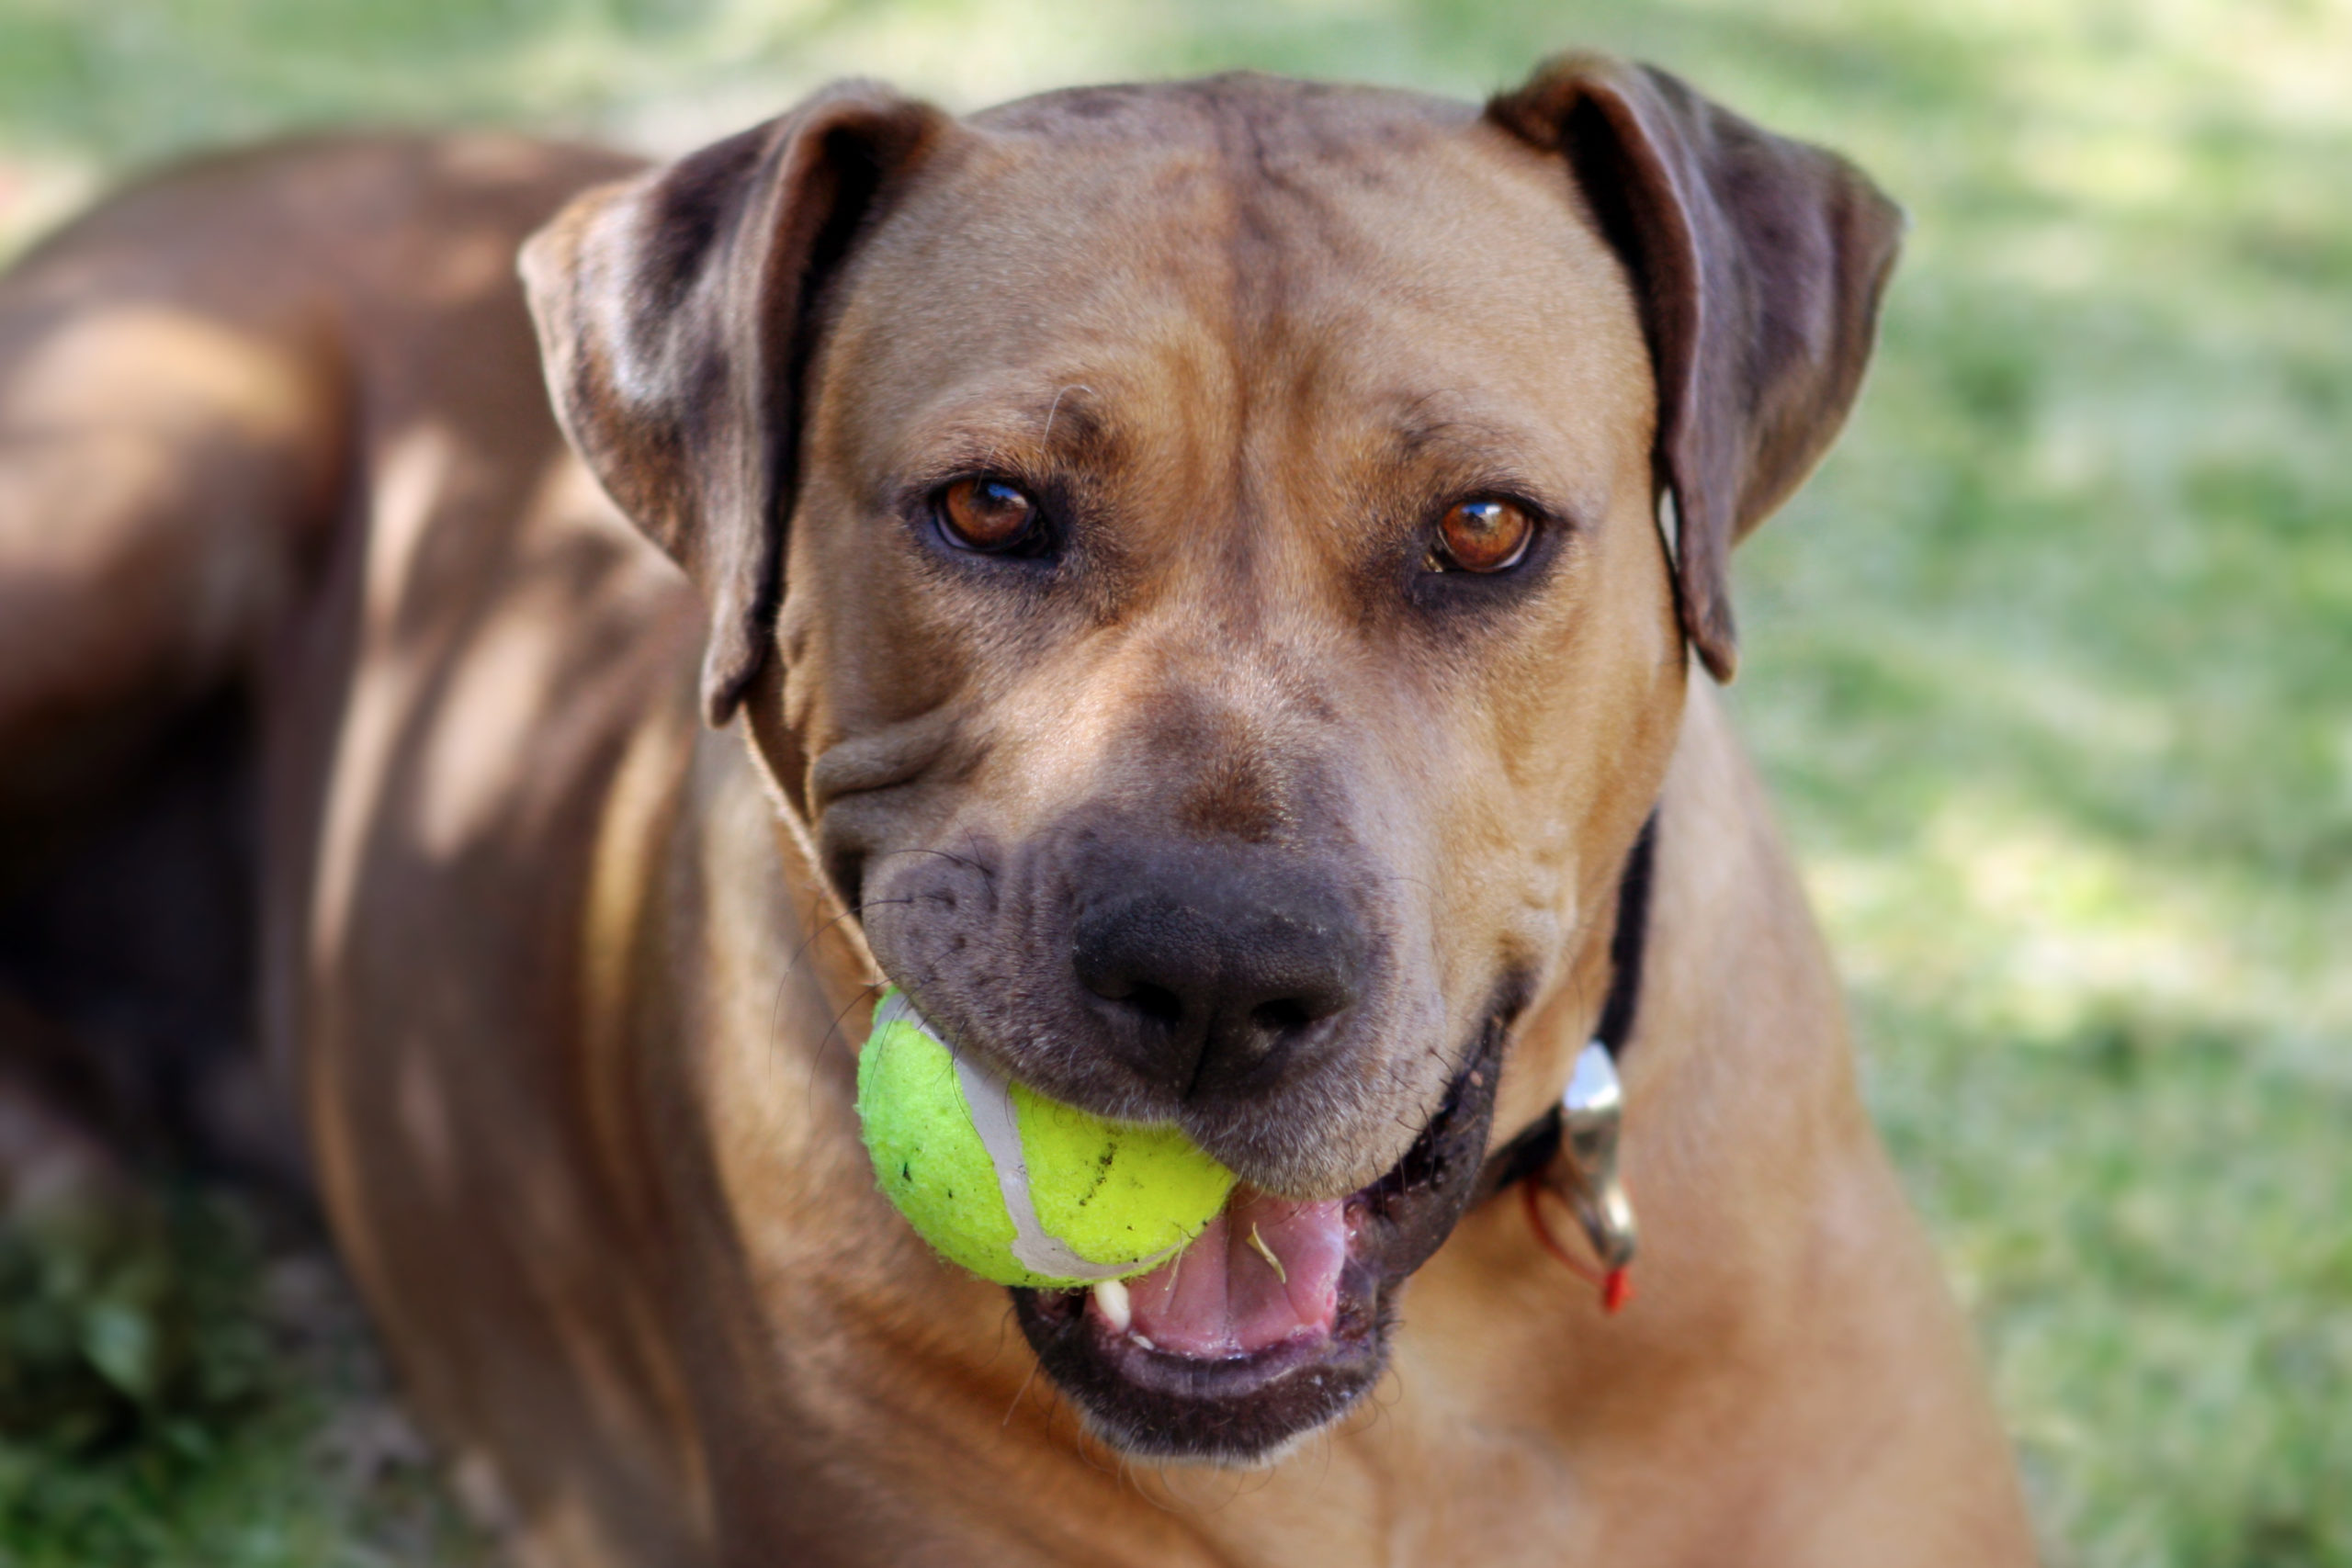 Rhodesian ridgeback with a tennis ball in her mouth